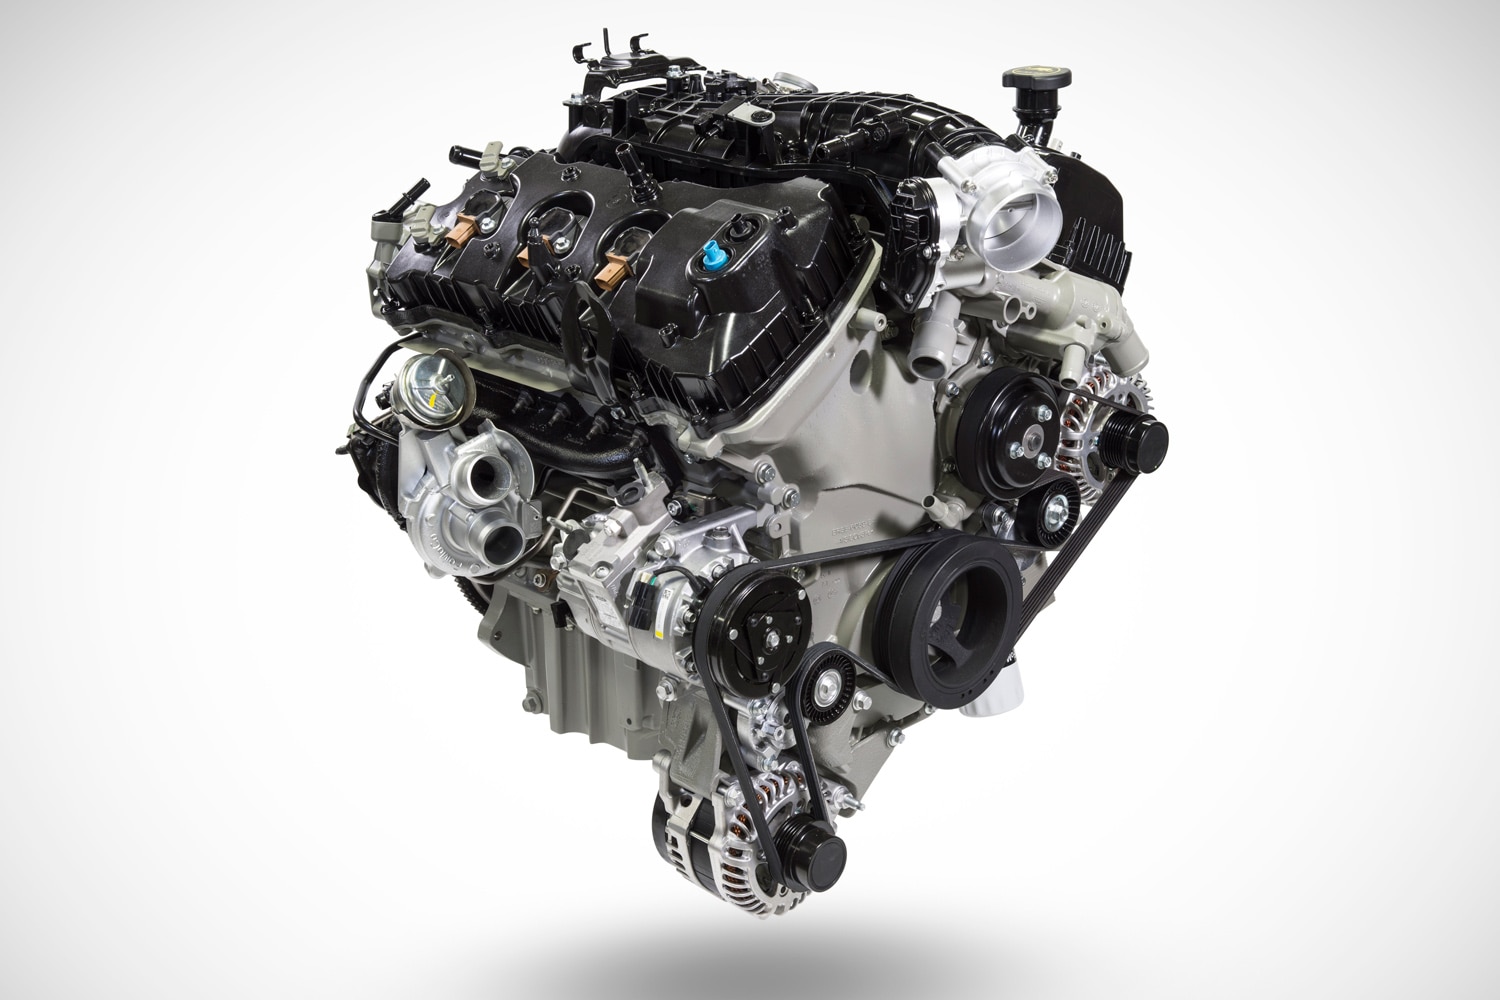 A 3.5-liter Ford Transit engine with EcoBoost